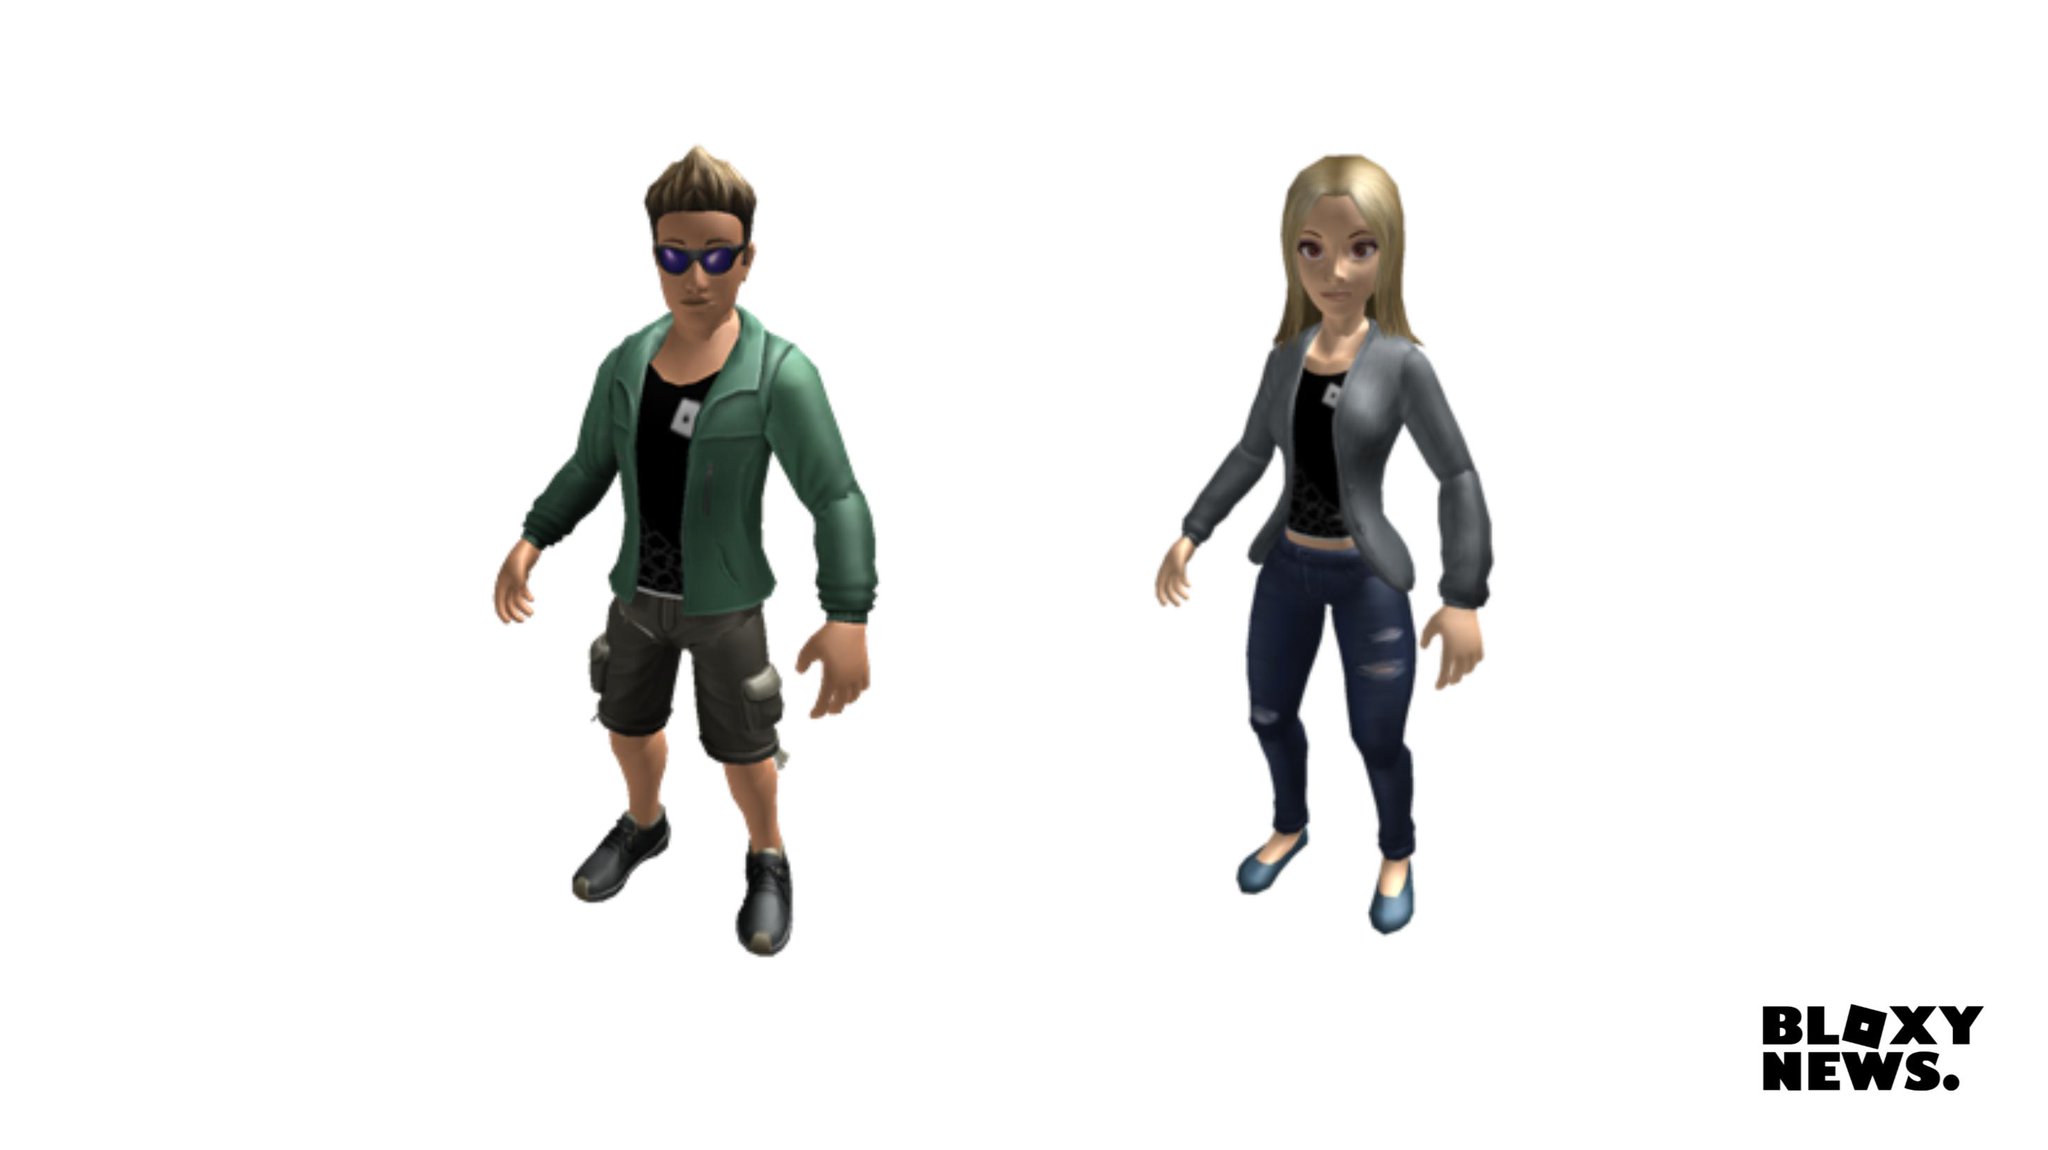 Bloxy News On Twitter Bloxynews These Are The First Two Roblox Rthro Bundles That Allow You To Put Whatever Shirt You Want On Under The Jackets Noah Https T Co Qpsoasj2rb Vanessa Https T Co 0ipsyp28cn Https T Co Nqu64v9jaj - bloxy news on twitter bloxynews looks like roblox is putting some of the rthro packages on sale some 50 off go and get some if you couldn t afford it before